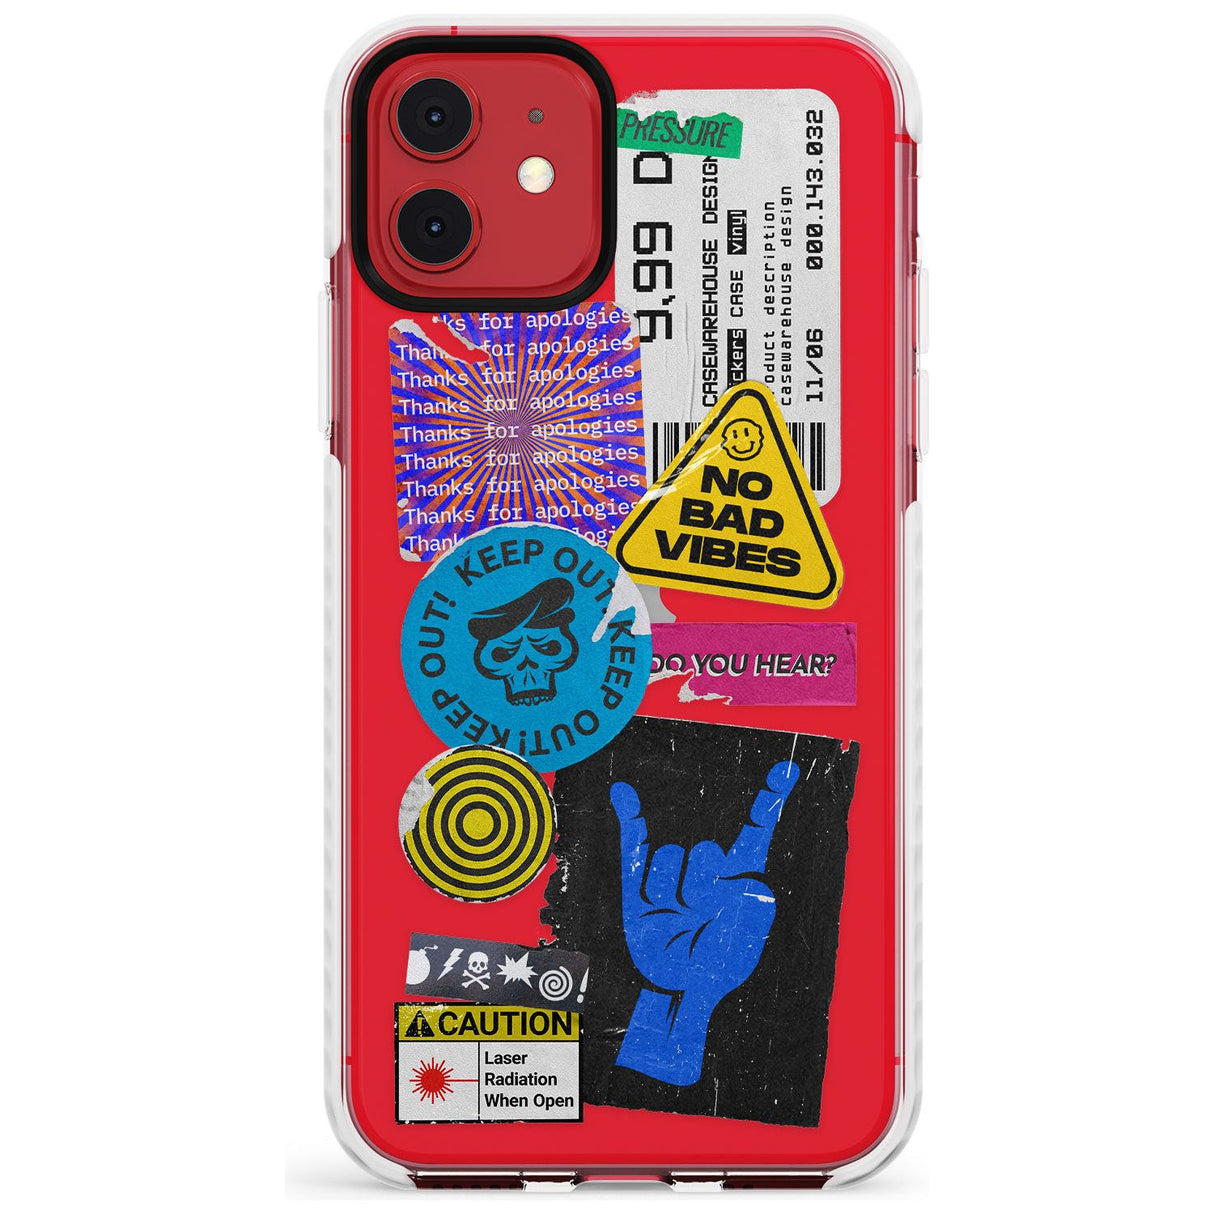 No Bad Vibes Sticker Mix Slim TPU Phone Case for iPhone 11